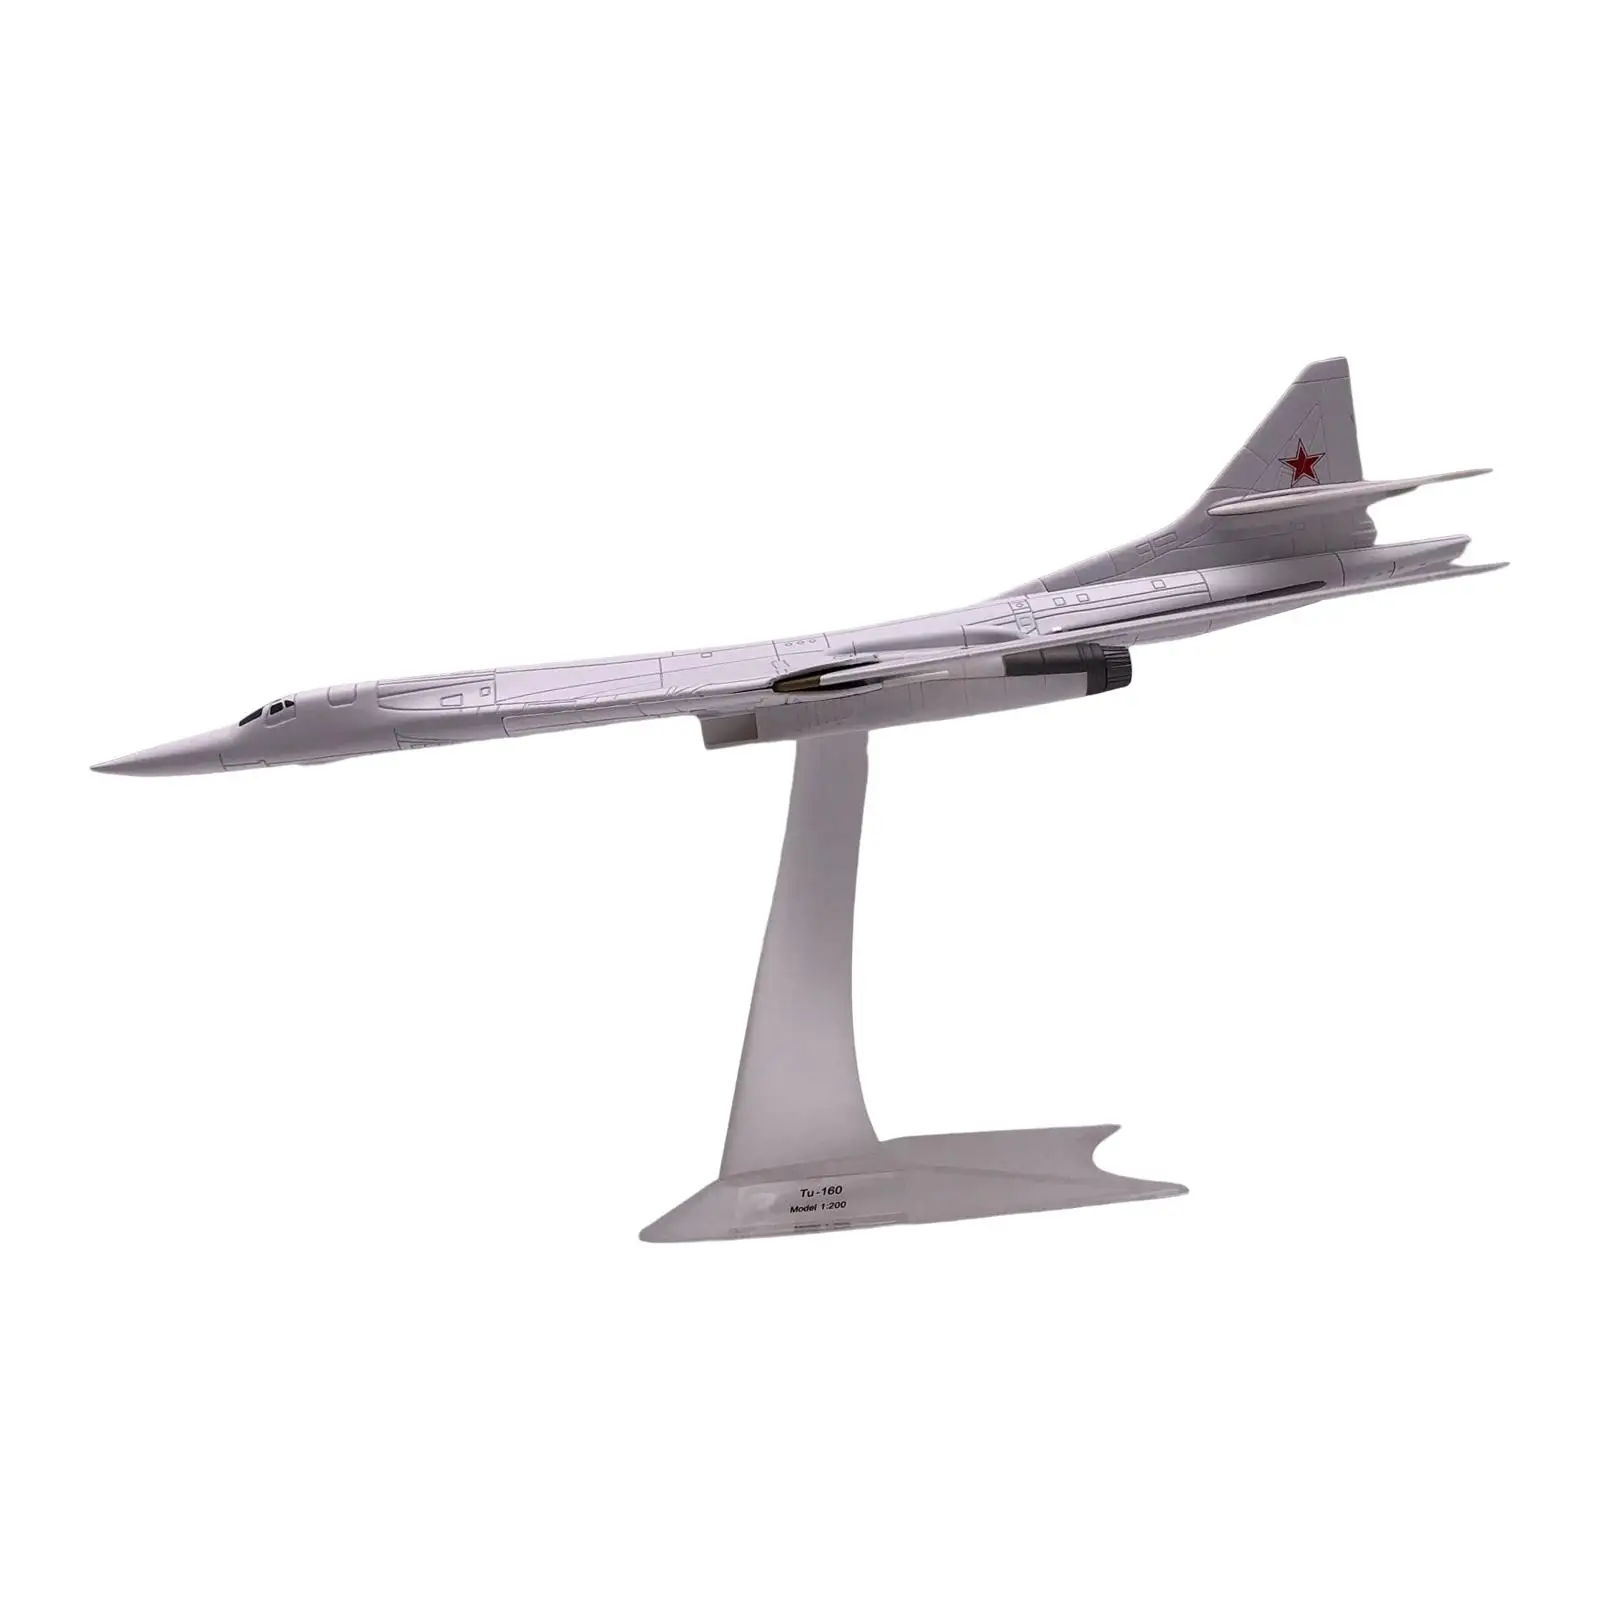 3D Bomber Fighter Model Plain Ornament Hobby Table with Stand 1:200 Scale Air Planes Diecast for Bedroom Desktop Home Decoration